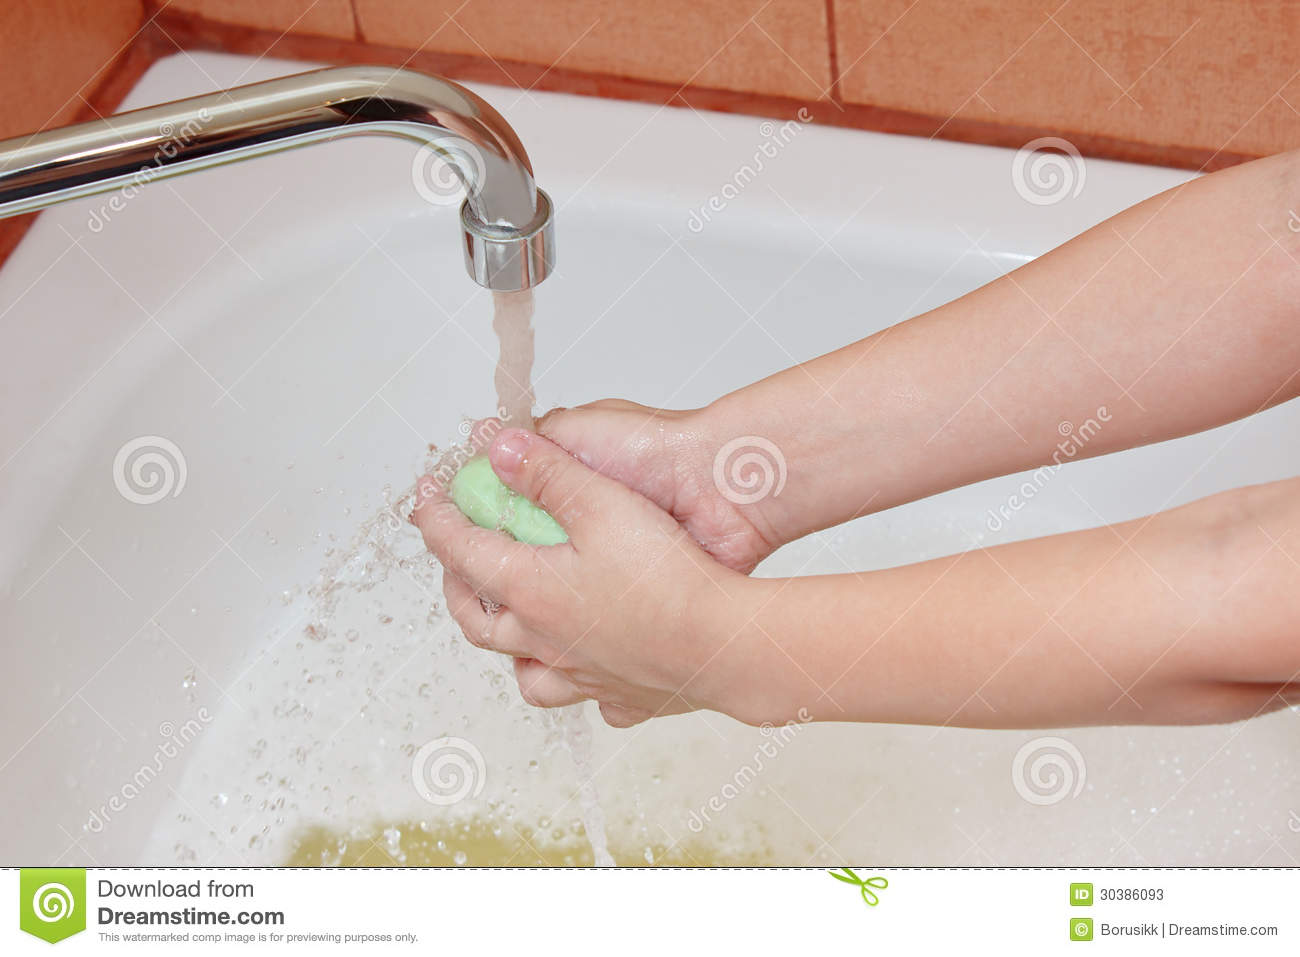 Washing Childrens Hands Under The Faucet In Bathro Stock Photos